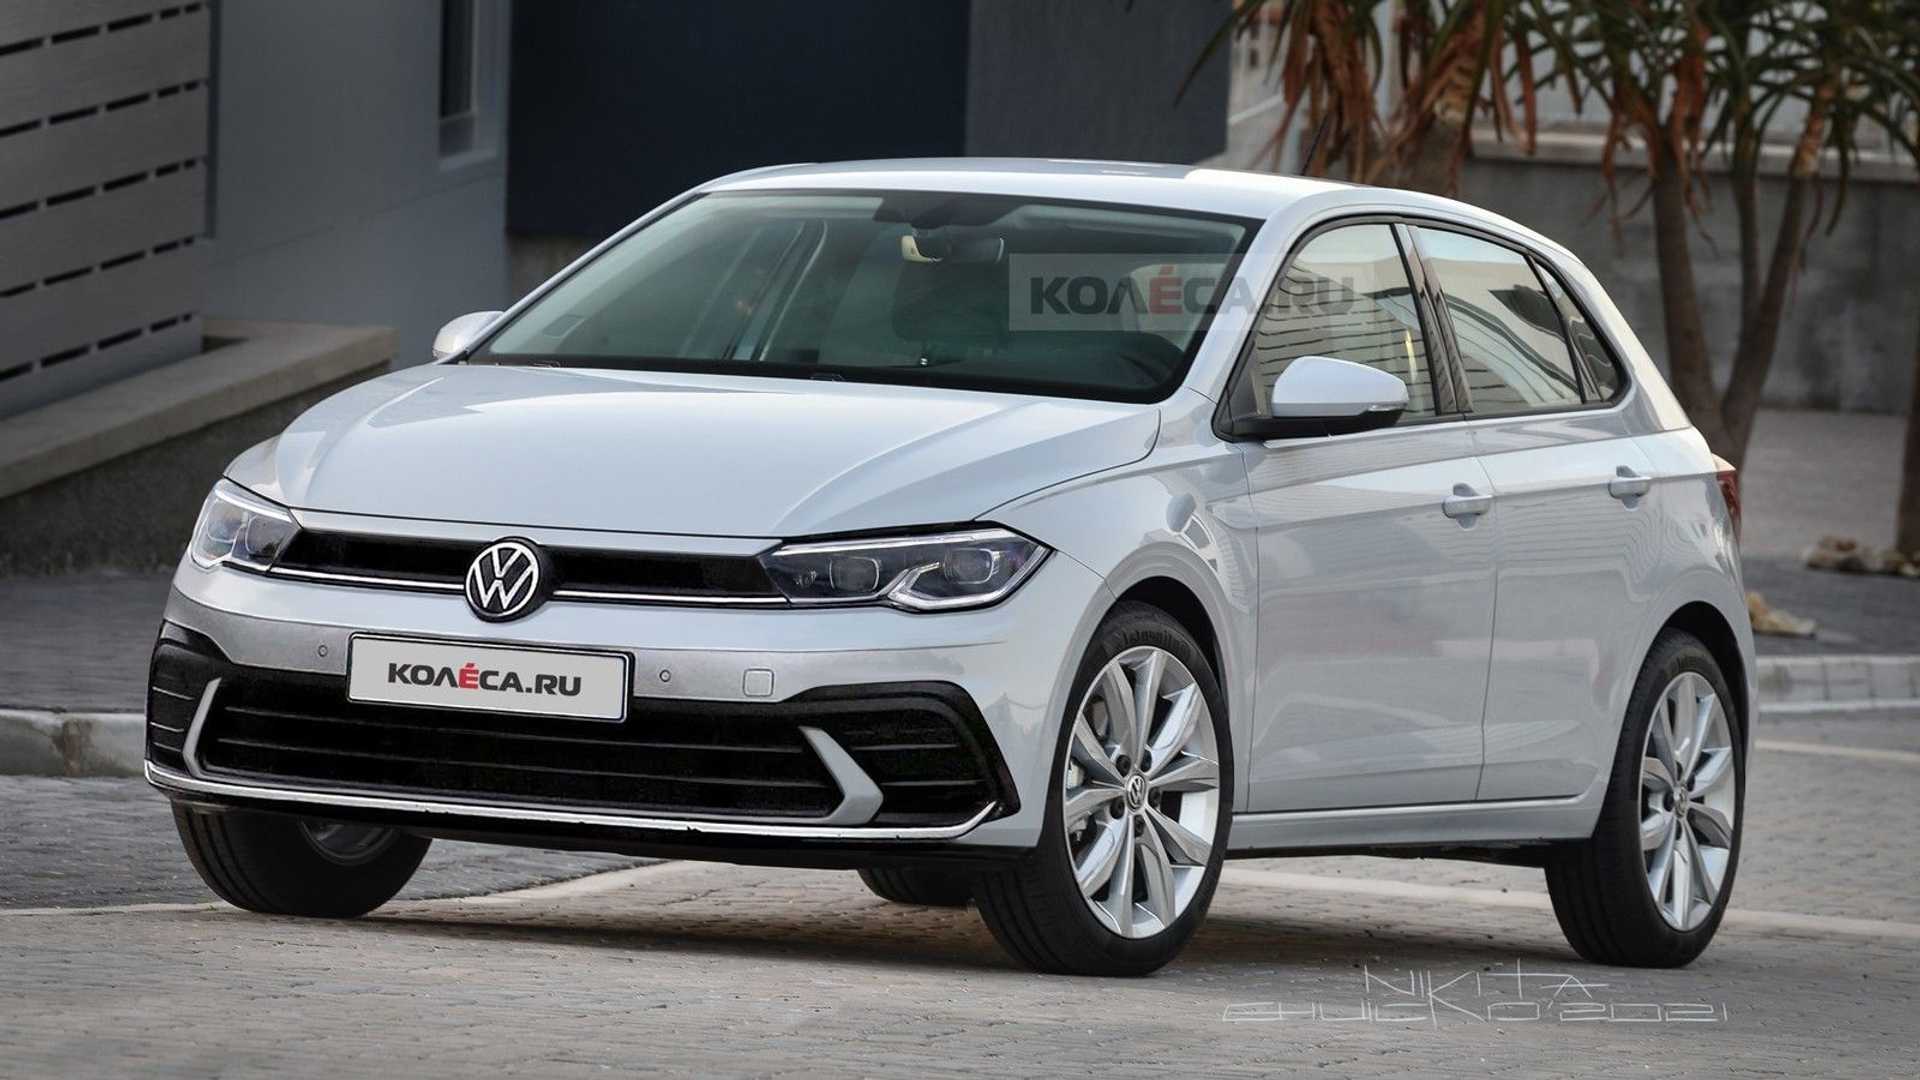 VW Polo Facelift Speculatively Rendered Based On Spy Shots